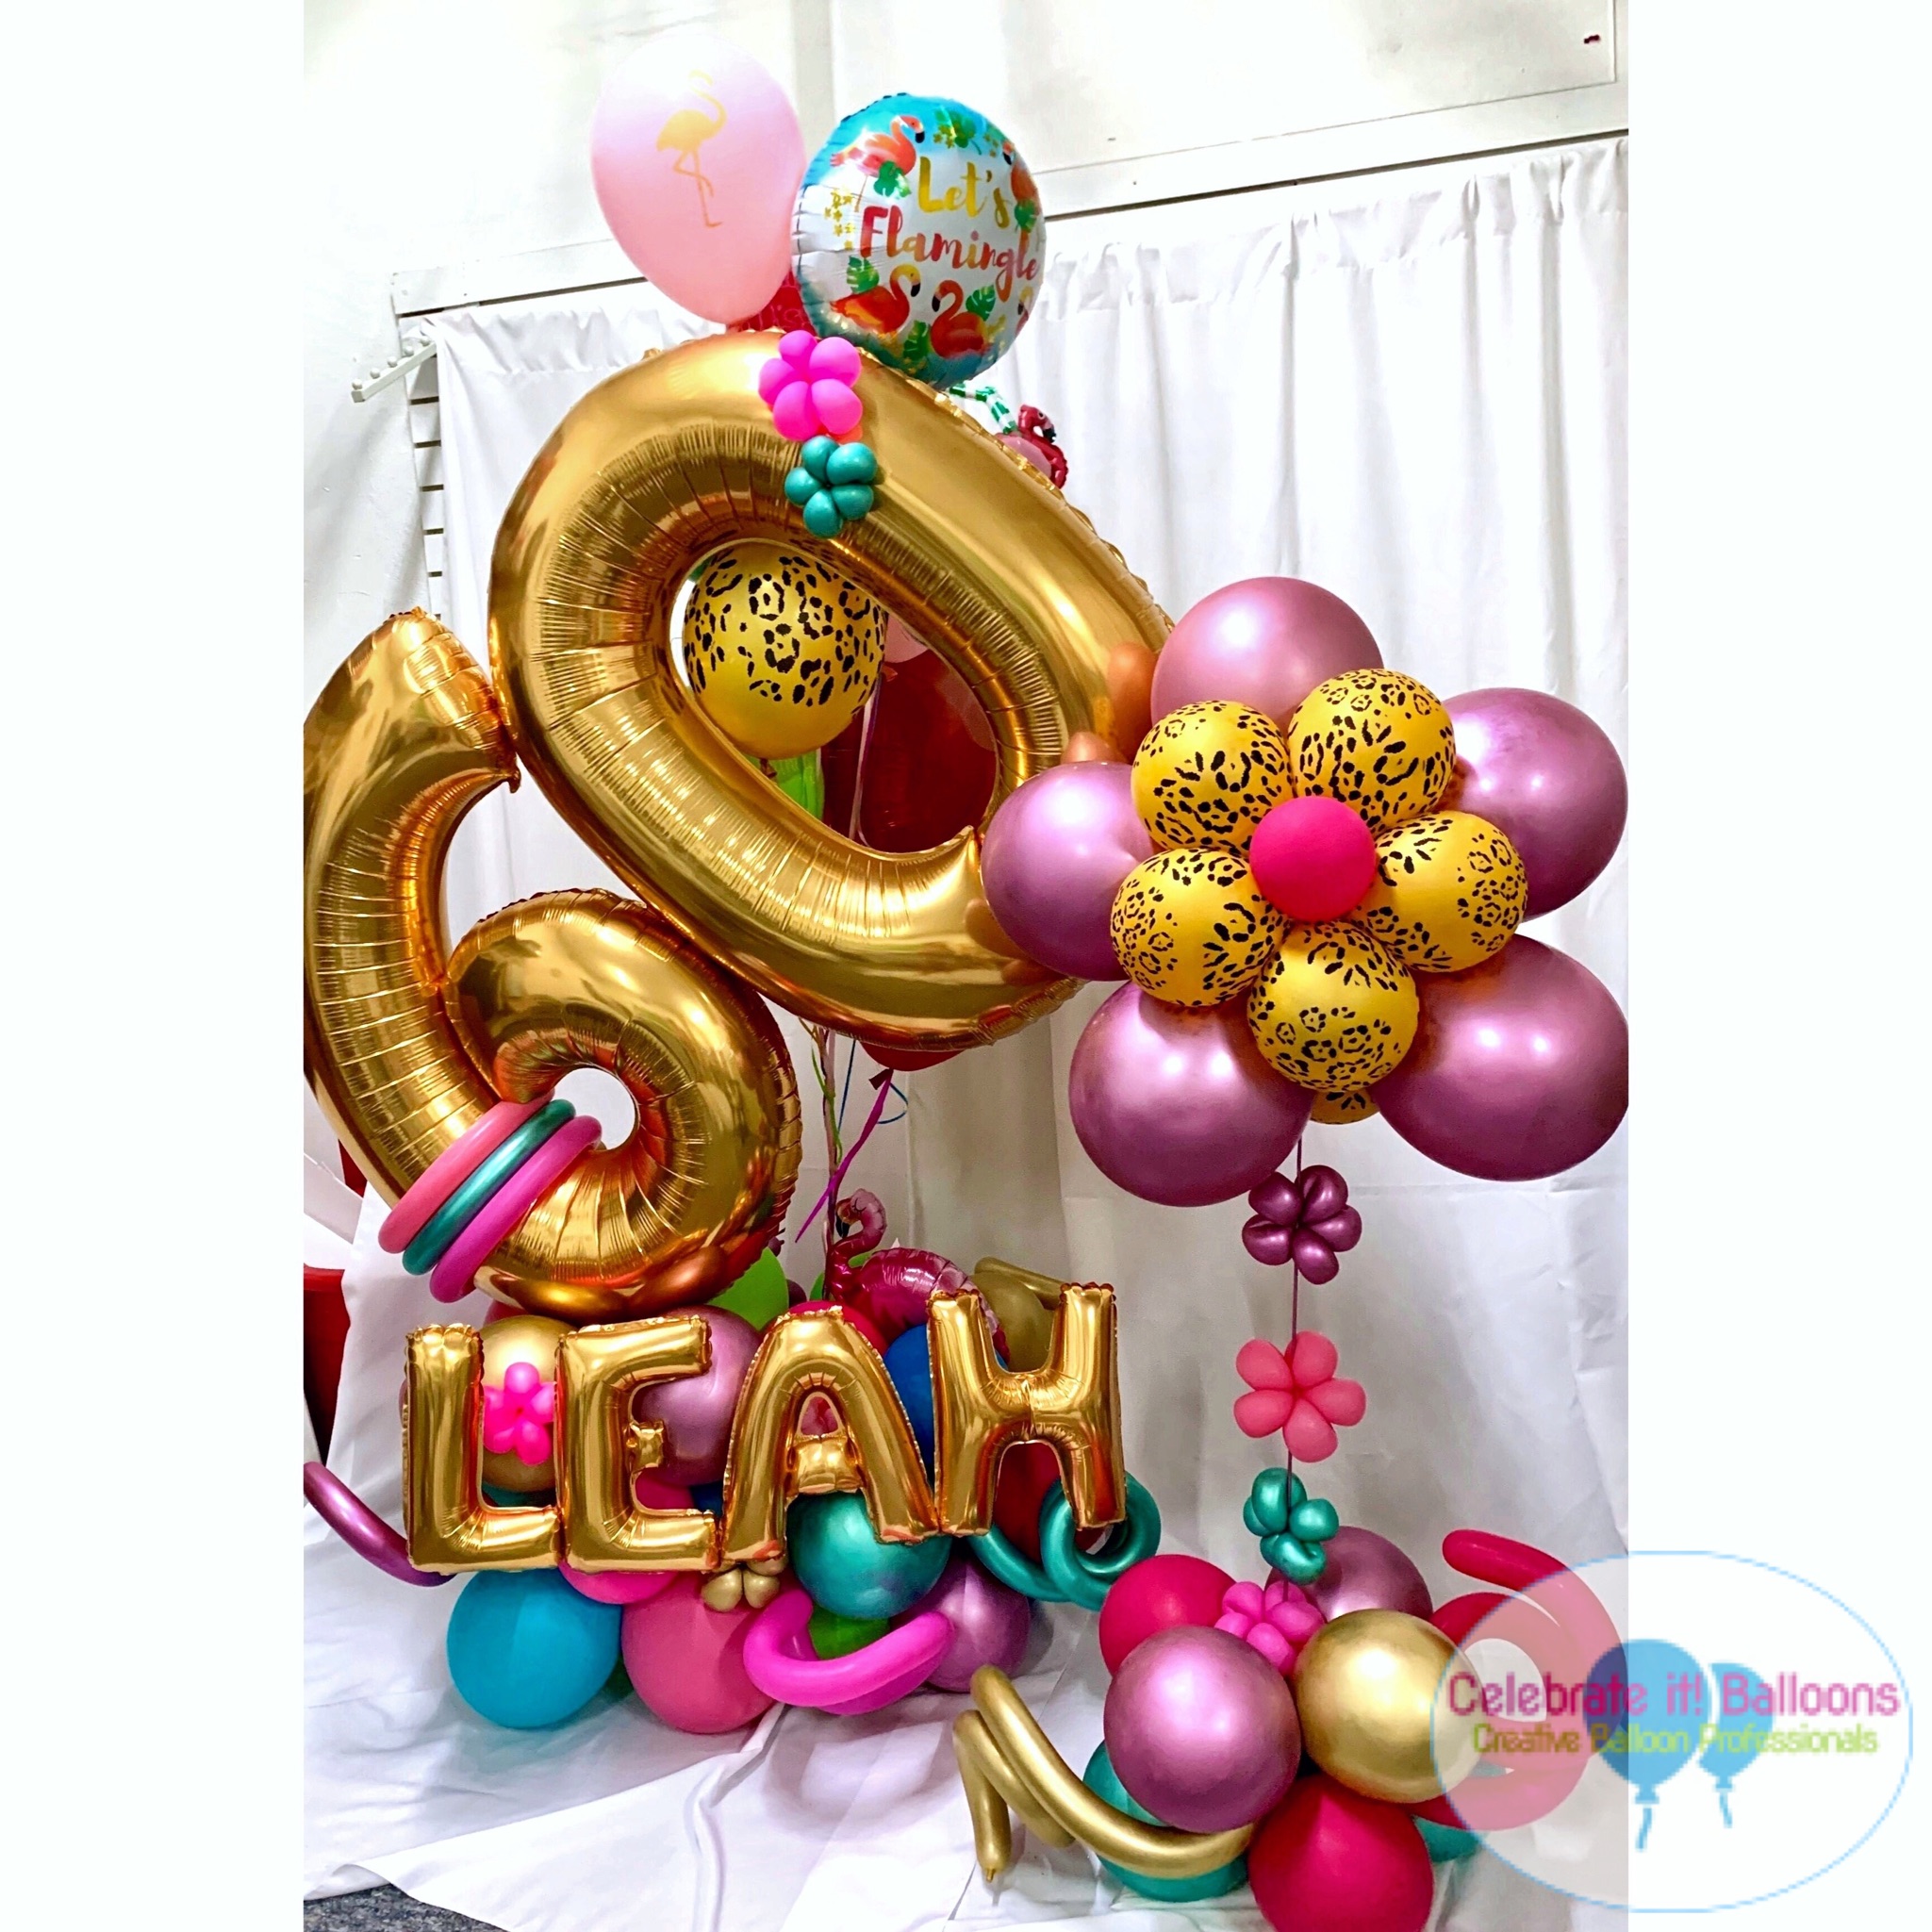 Birthday balloons with name and age for delivery plus centerpiece